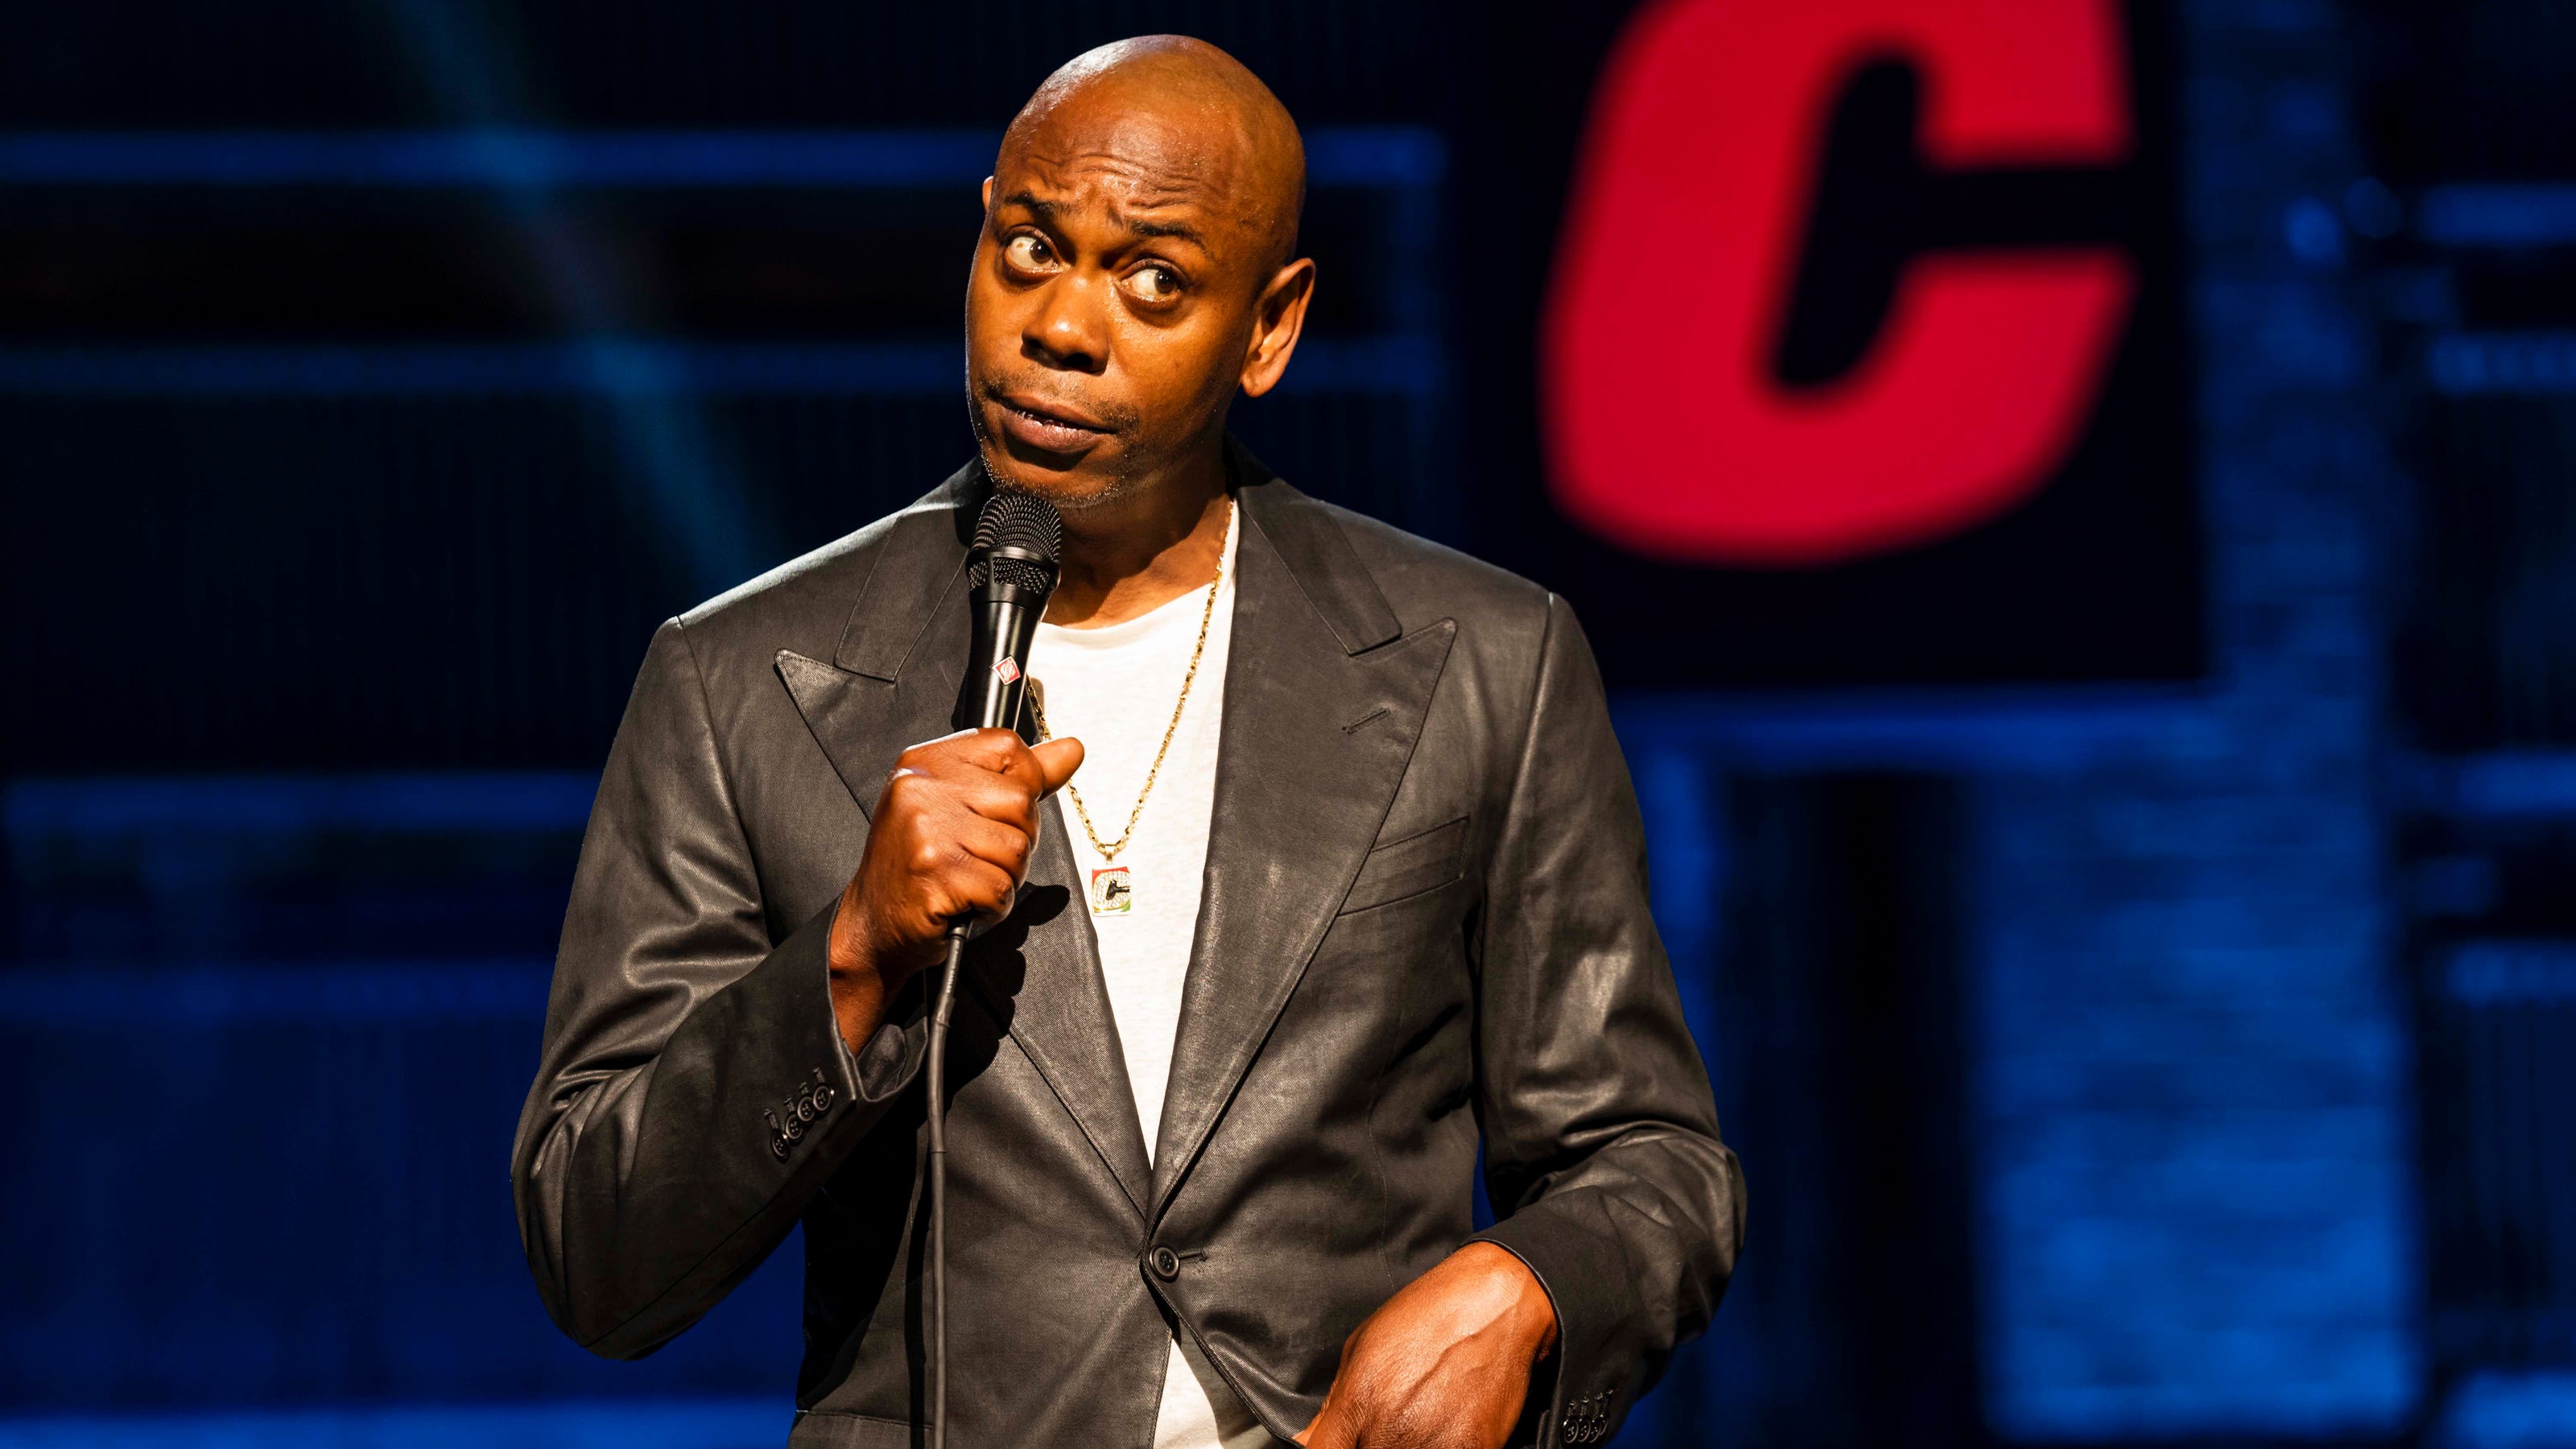 Netflix employees file labor charges against company following Dave Chappelle controversy